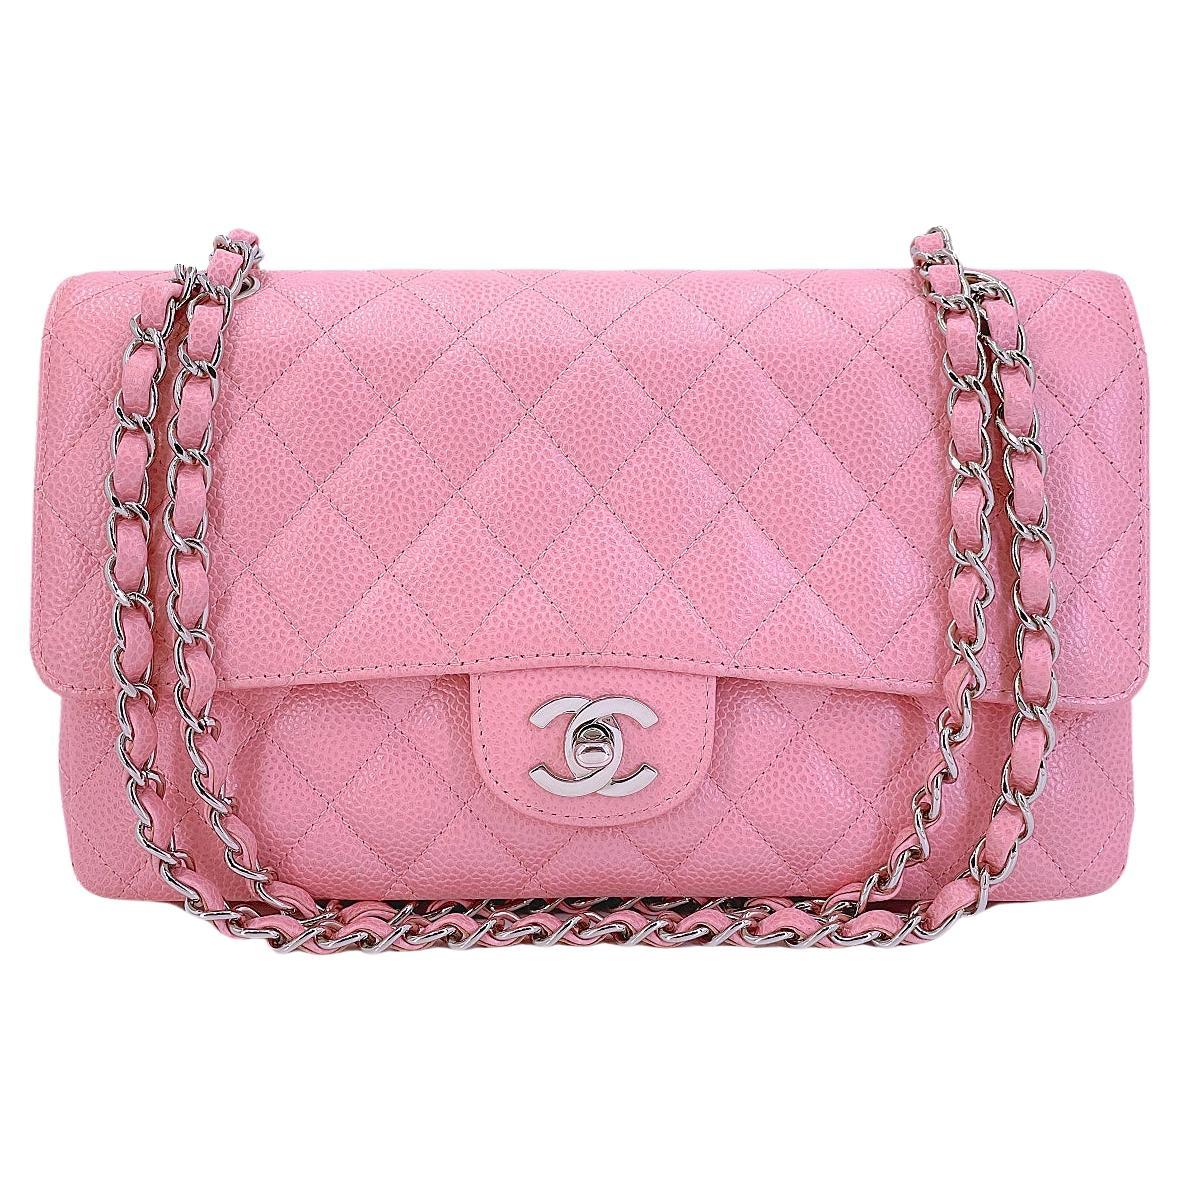 How can you spot a fake Chanel bag?